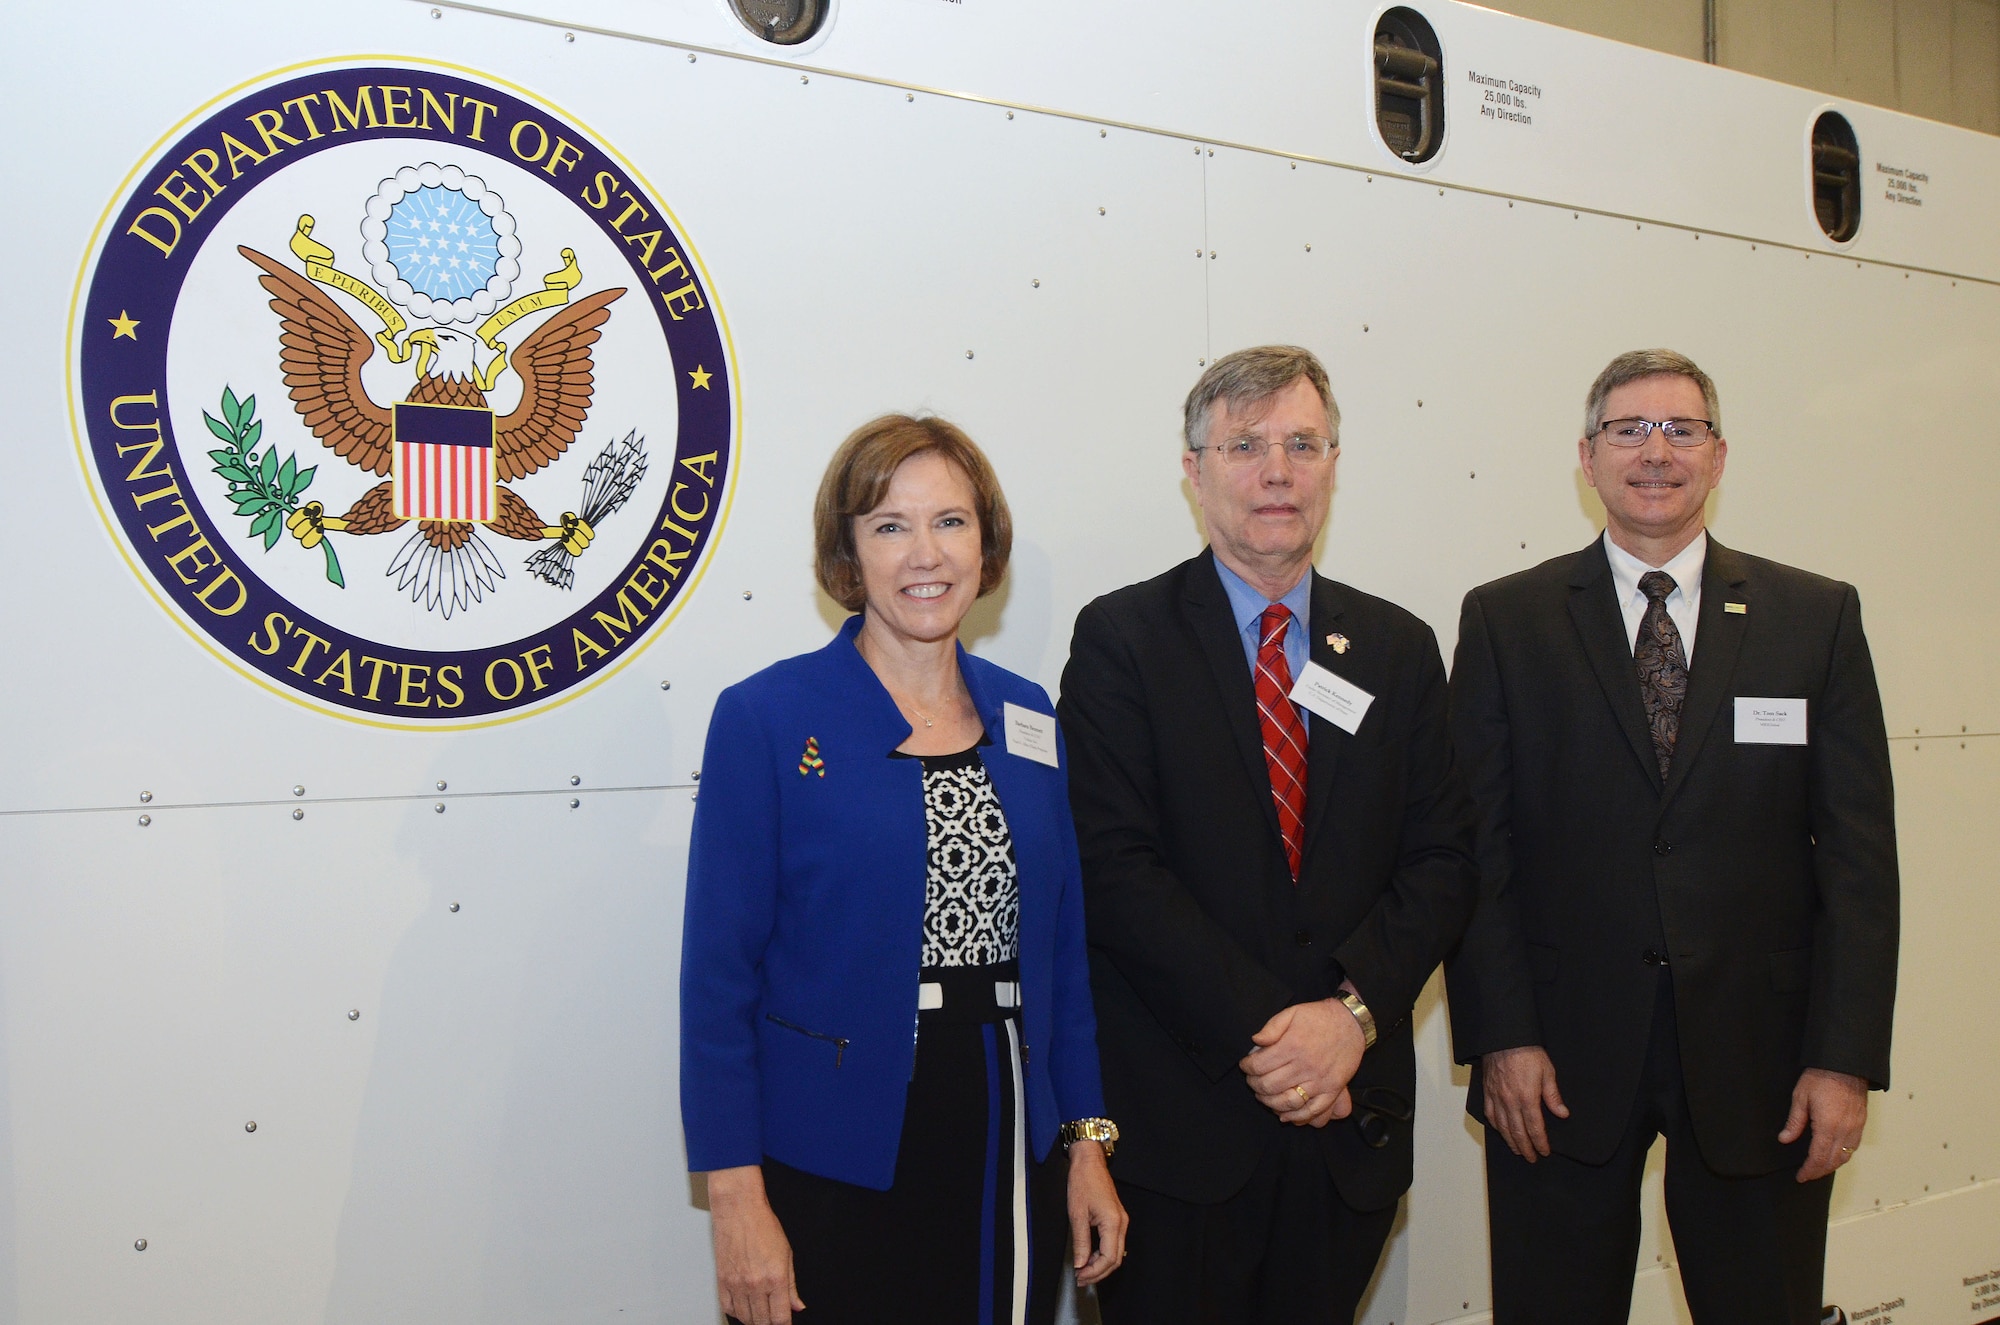 Barbara Bennett, President and COO of Vulcan, Inc. and Paul G. Alan Ebola Program representative, Patrick Kennedy, Under Secretary of Management from the United States Department of State, and Dr. Tom Sack, President and CEO of MRI Global, stand in front of the Department of State's Containerized Biocontainment System during its’ unveiling ceremony held at Dobbins Air Reserve Base, Ga. Aug. 11, 2015. (U.S. Air Force photo/Don Peek)